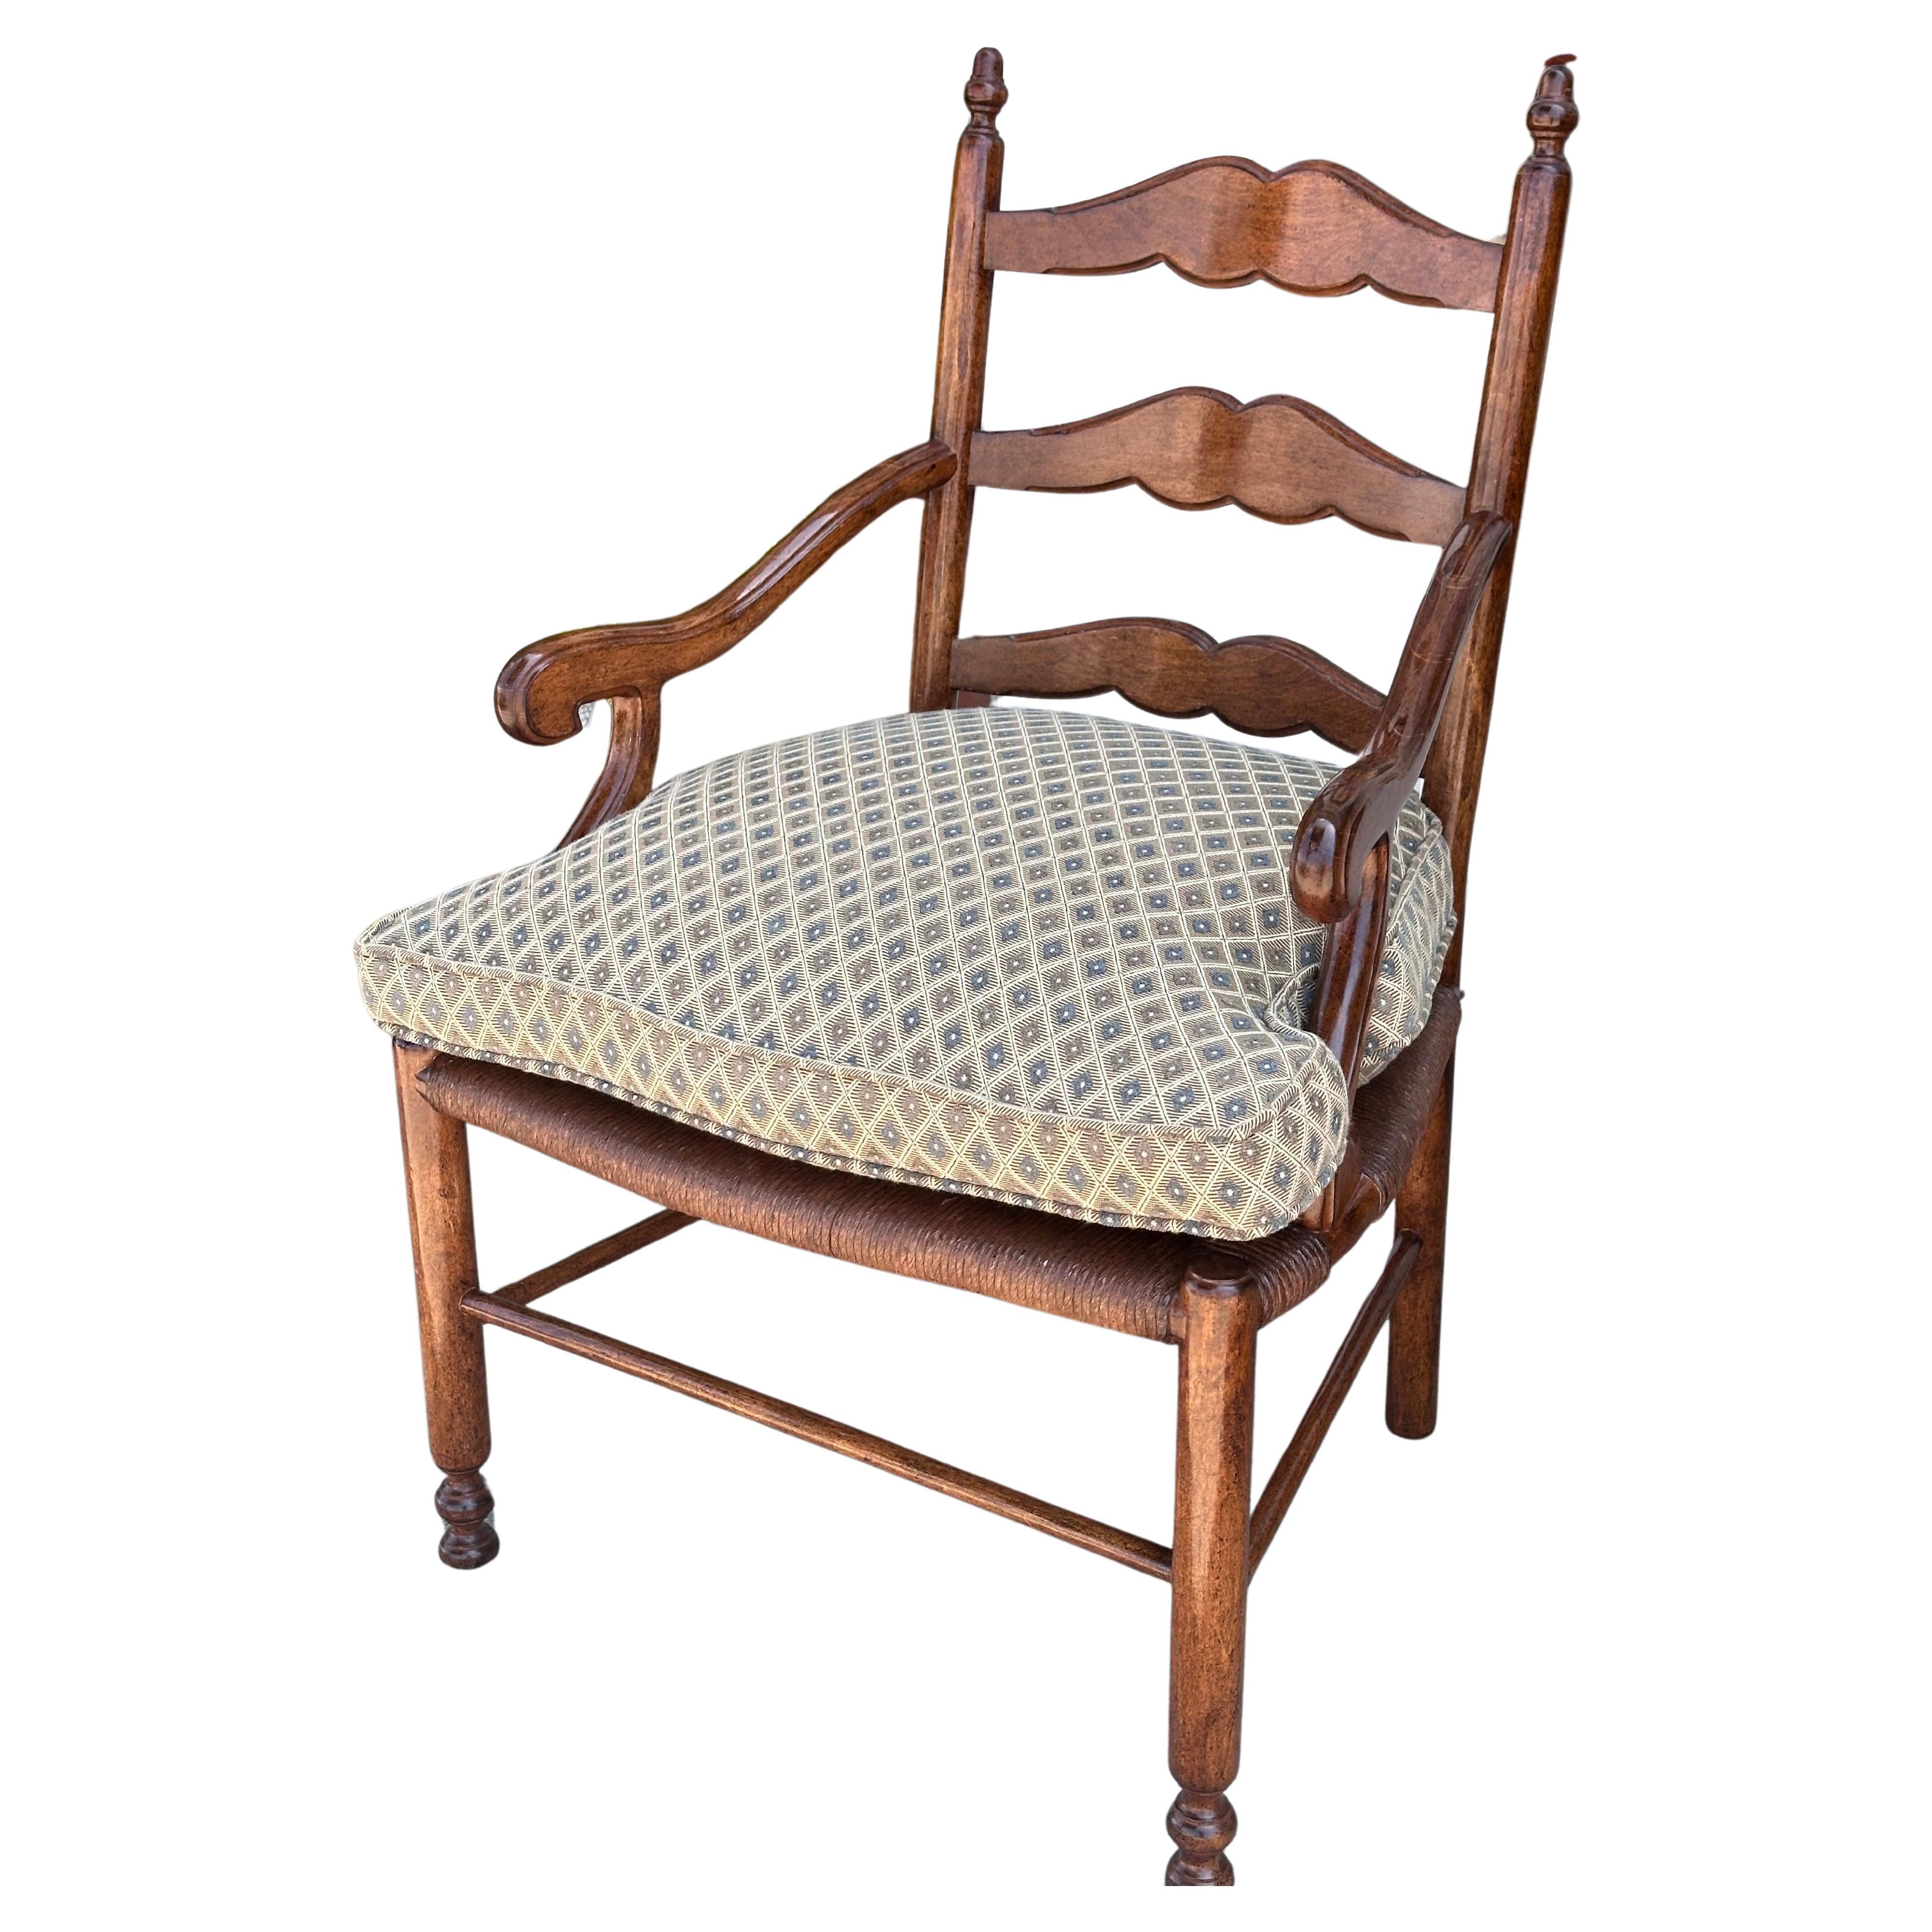 Minton-Spidell Chairs